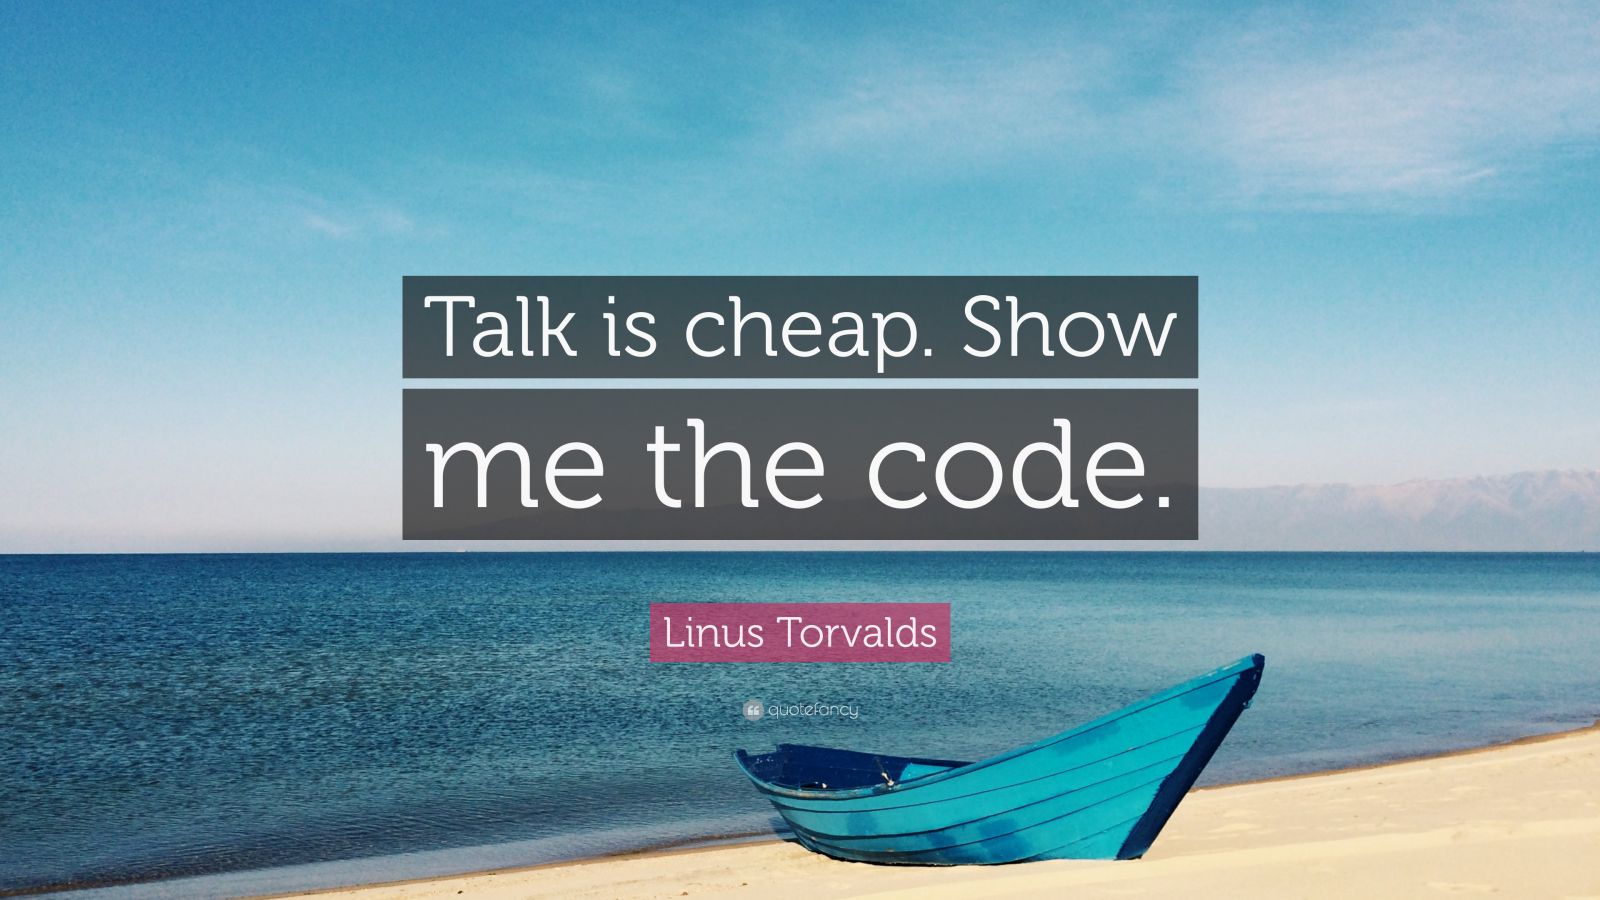 Linus Torvalds Quote: “Talk is cheap. Show me the code.” (14 wallpapers) - Quotefancy1600 x 900